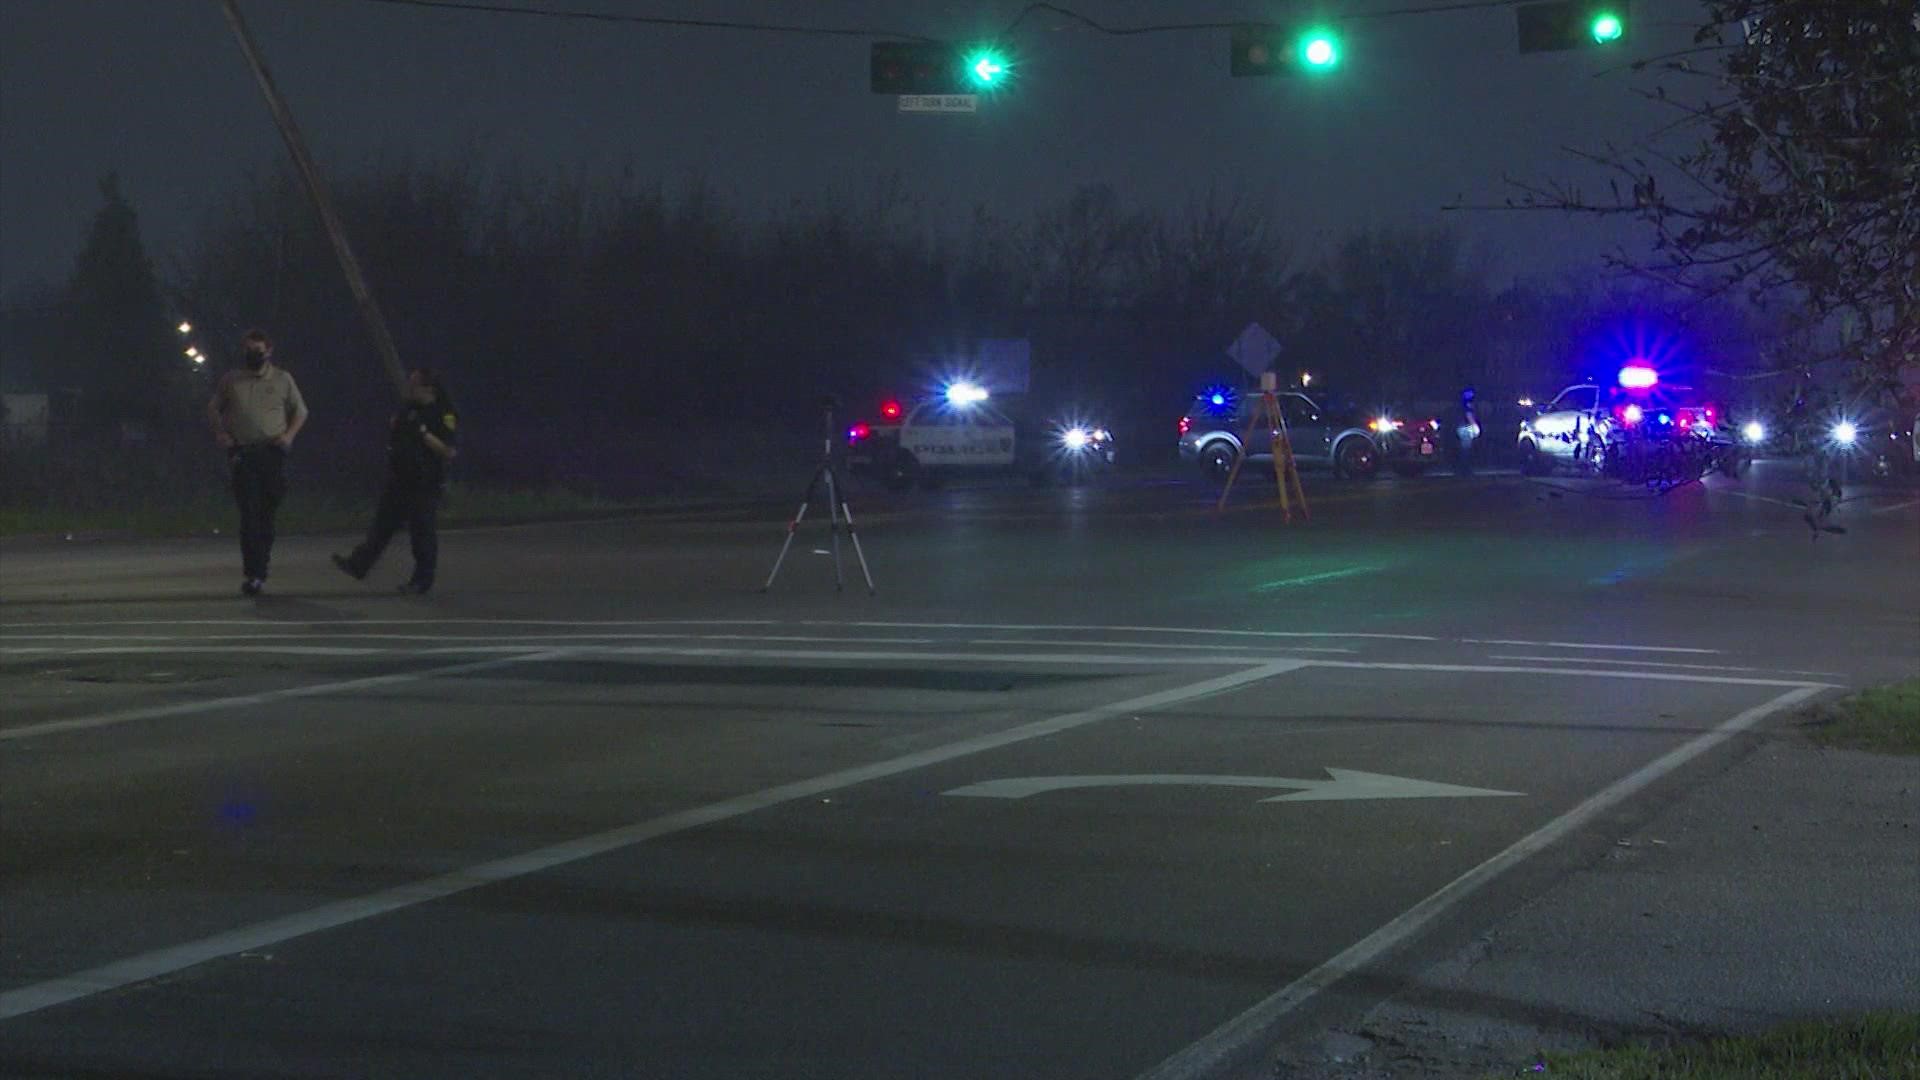 Houston police are investigating a crash involving a pedestrian and an off-duty Harris County deputy in southwest Houston Thursday night.